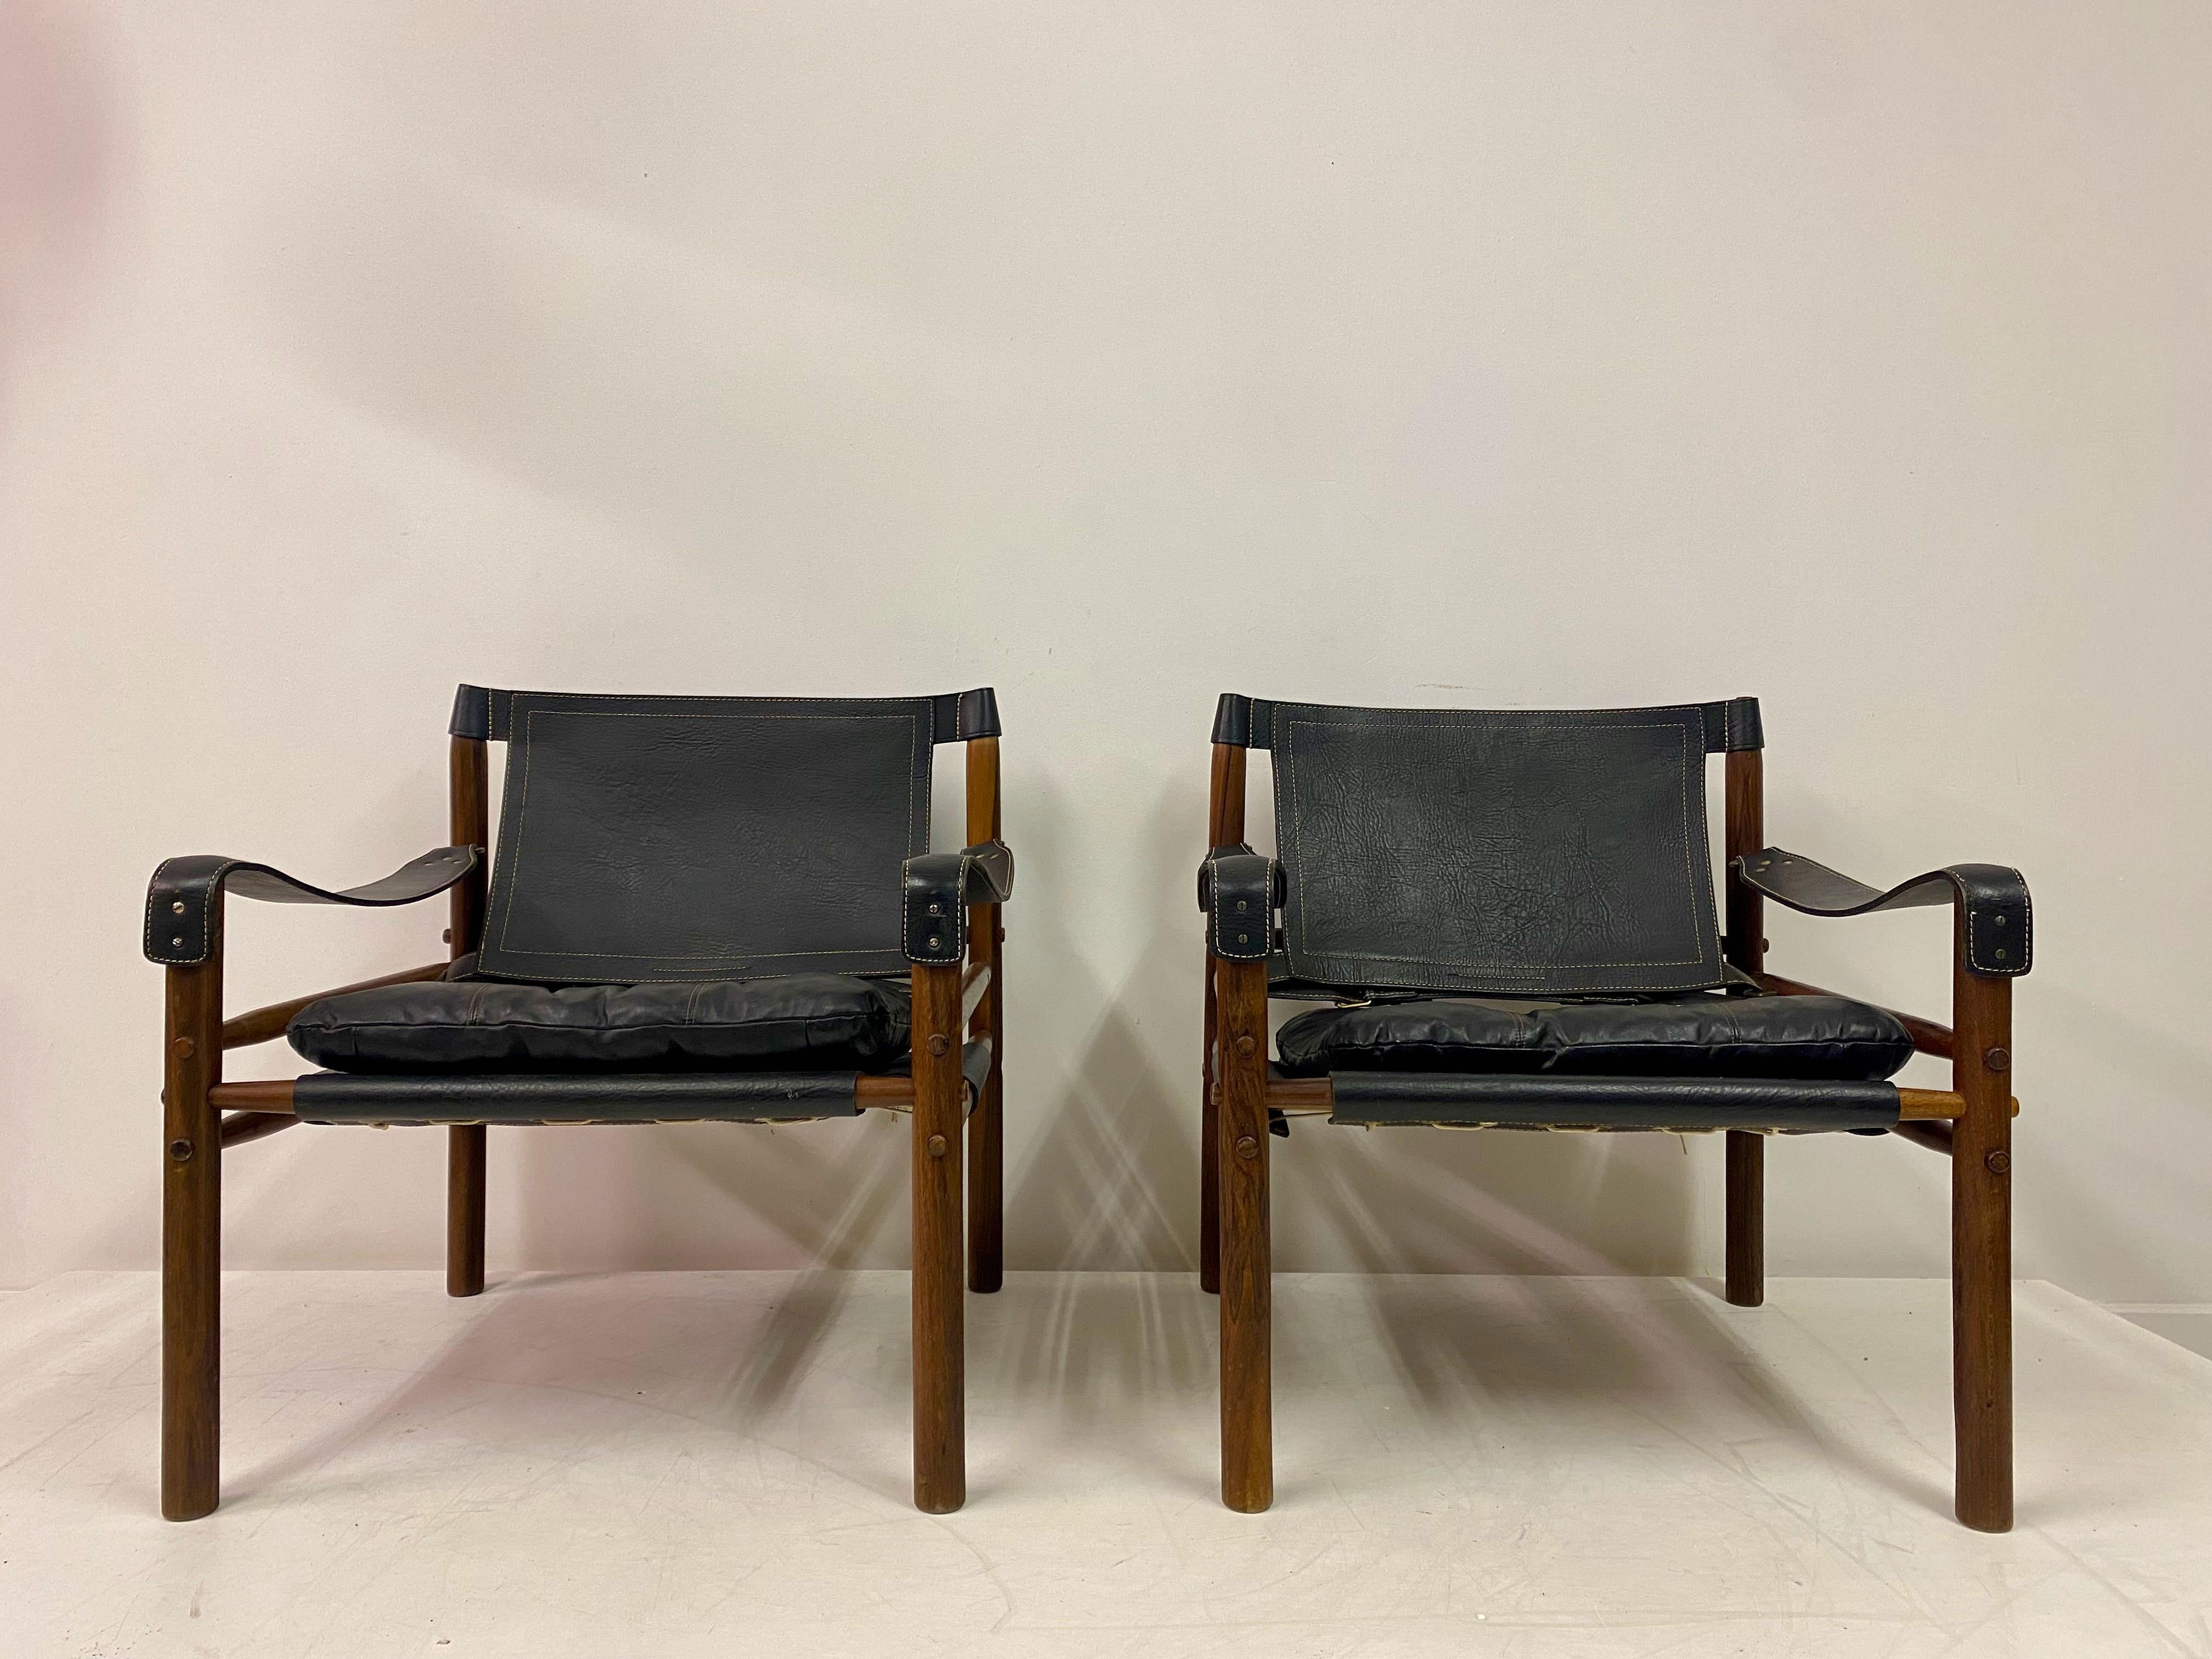 Pair of safari chairs

By Arne Norell 

Sirocco model

Made in Colombia for Scanform

Rosewood frame

Black leather

Two pairs available.